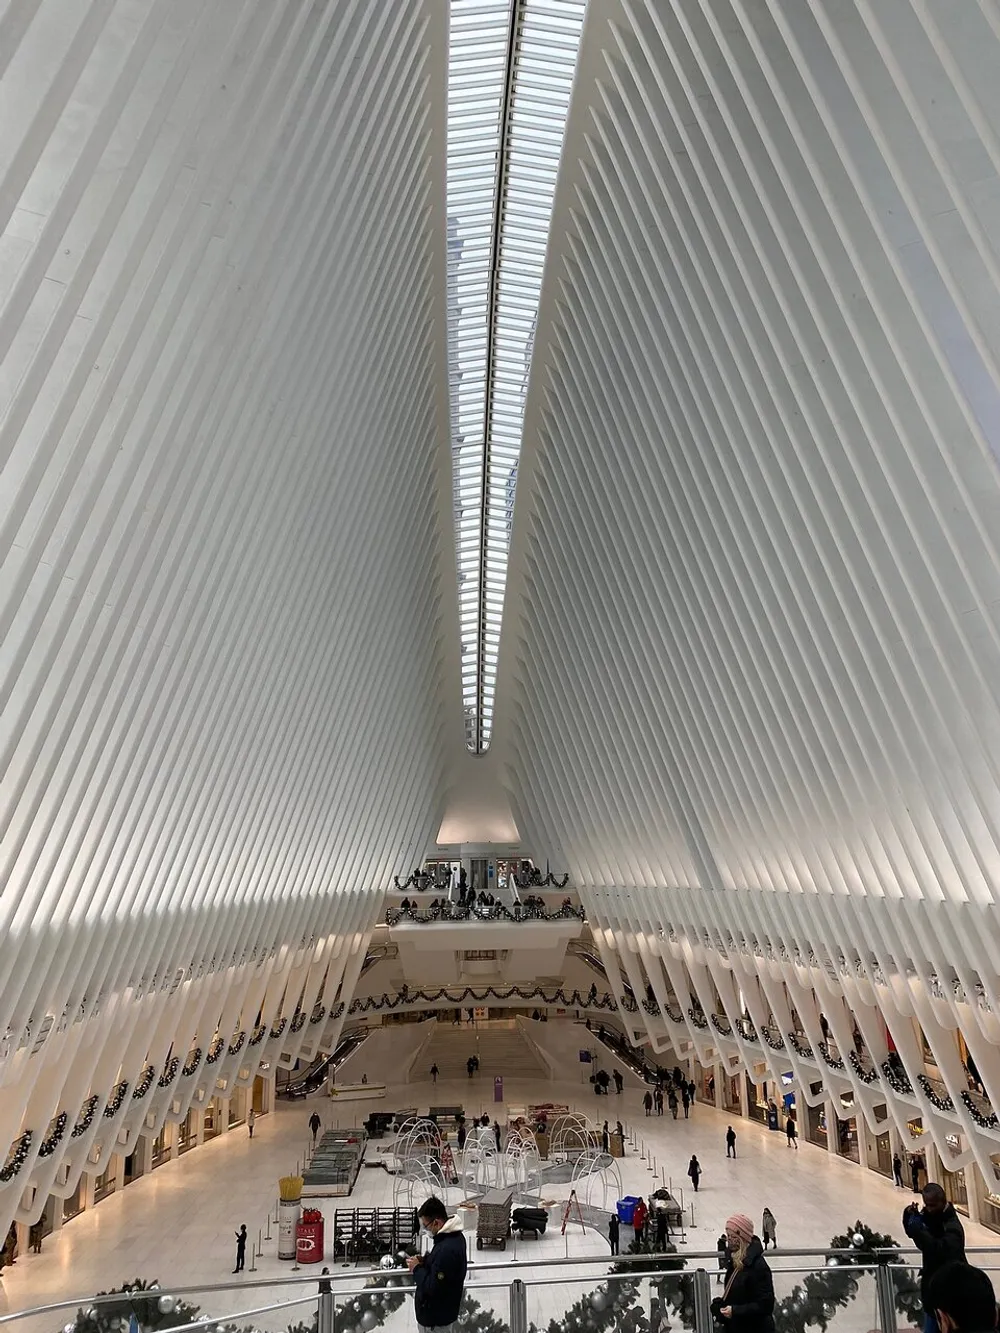 The image captures the expansive white-ribbed interior of the Oculus transportation hub at the World Trade Center site in New York City bustling with people and activity